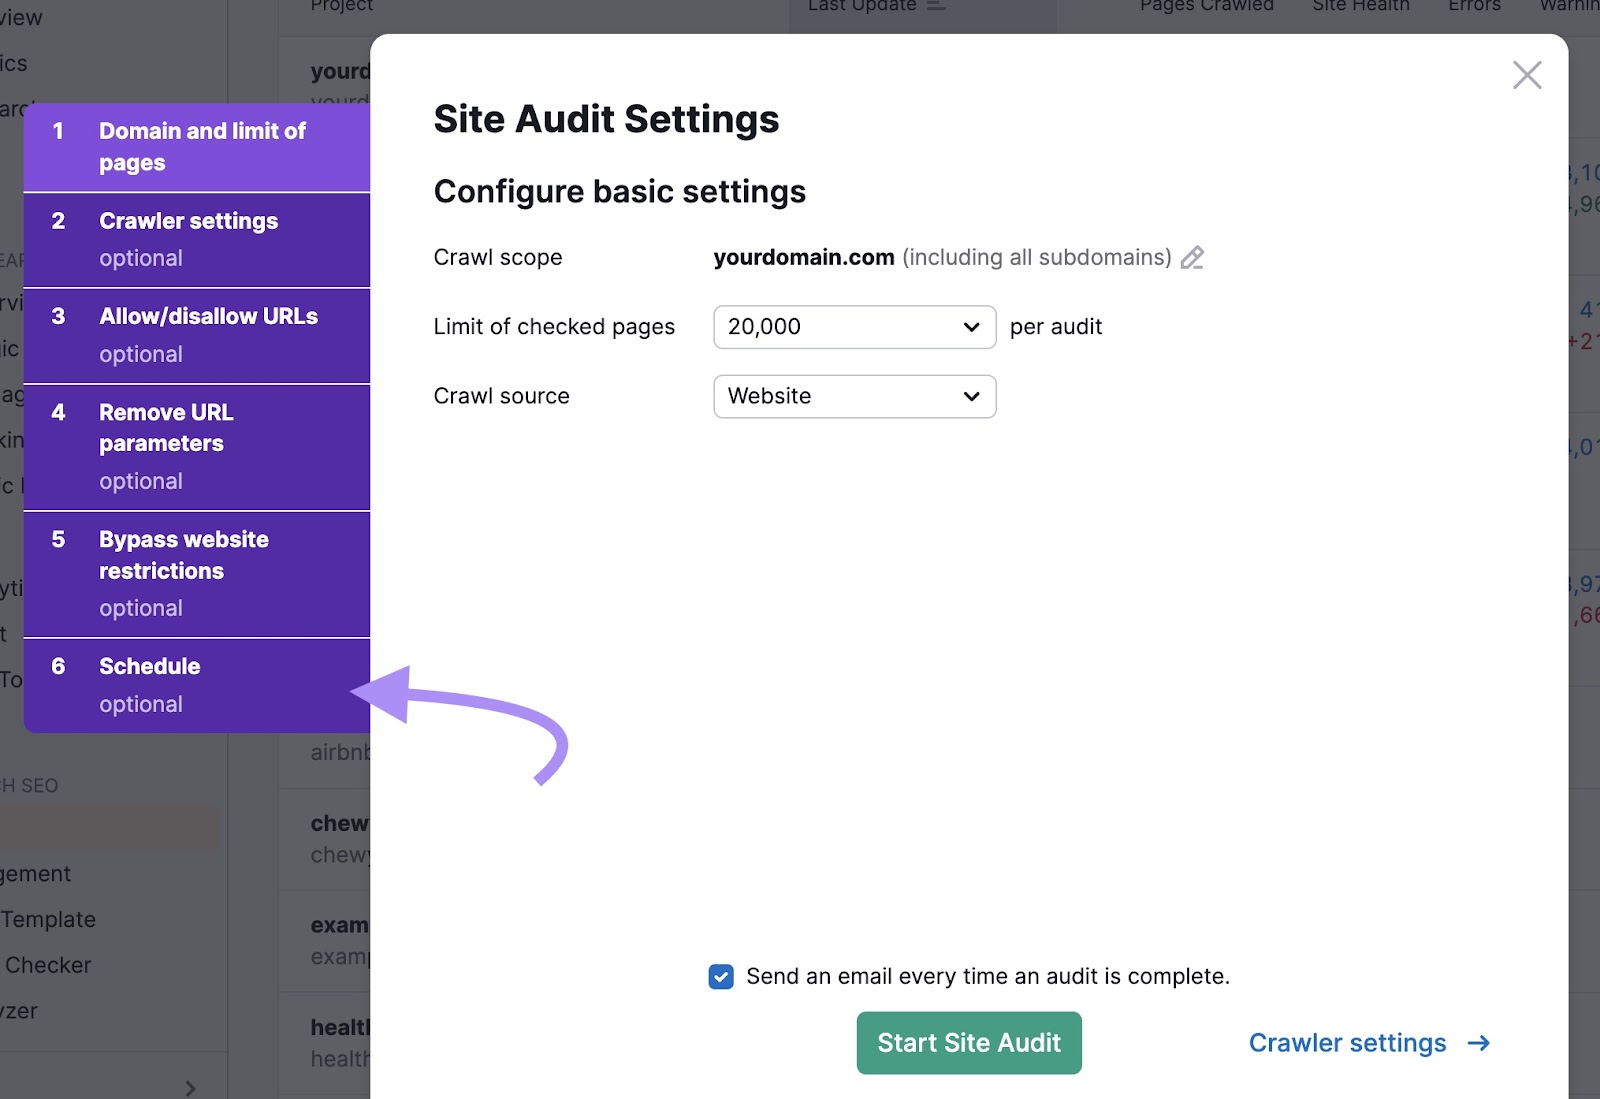 "Schedule" tab highlighted successful  the "Site Audit Settings" window